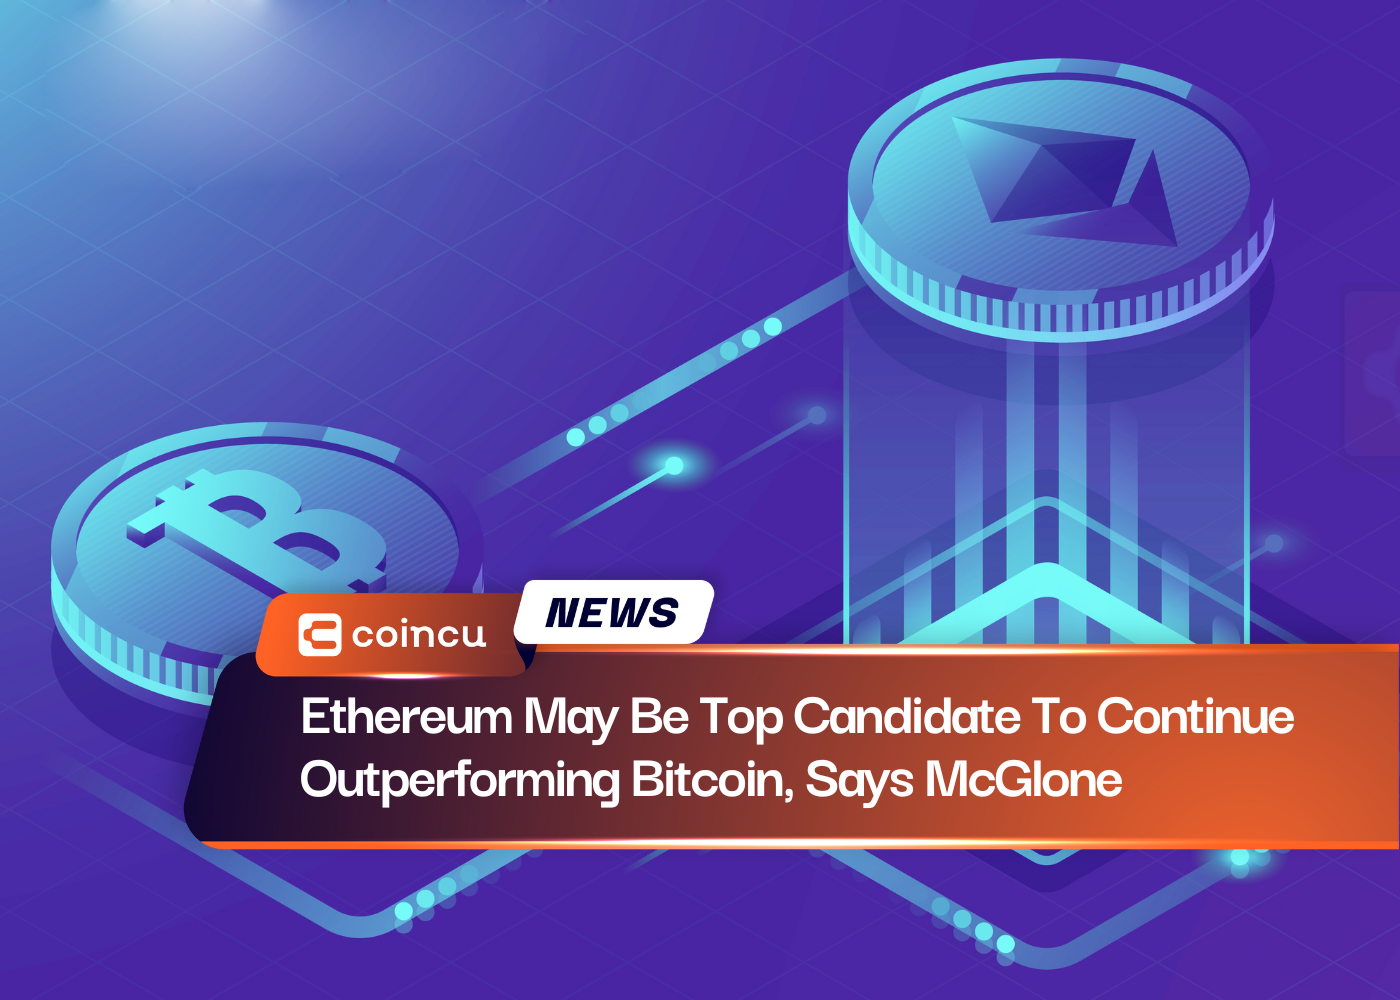 Ethereum May Be Top Candidate To Continue Outperforming Bitcoin, Says McGlone